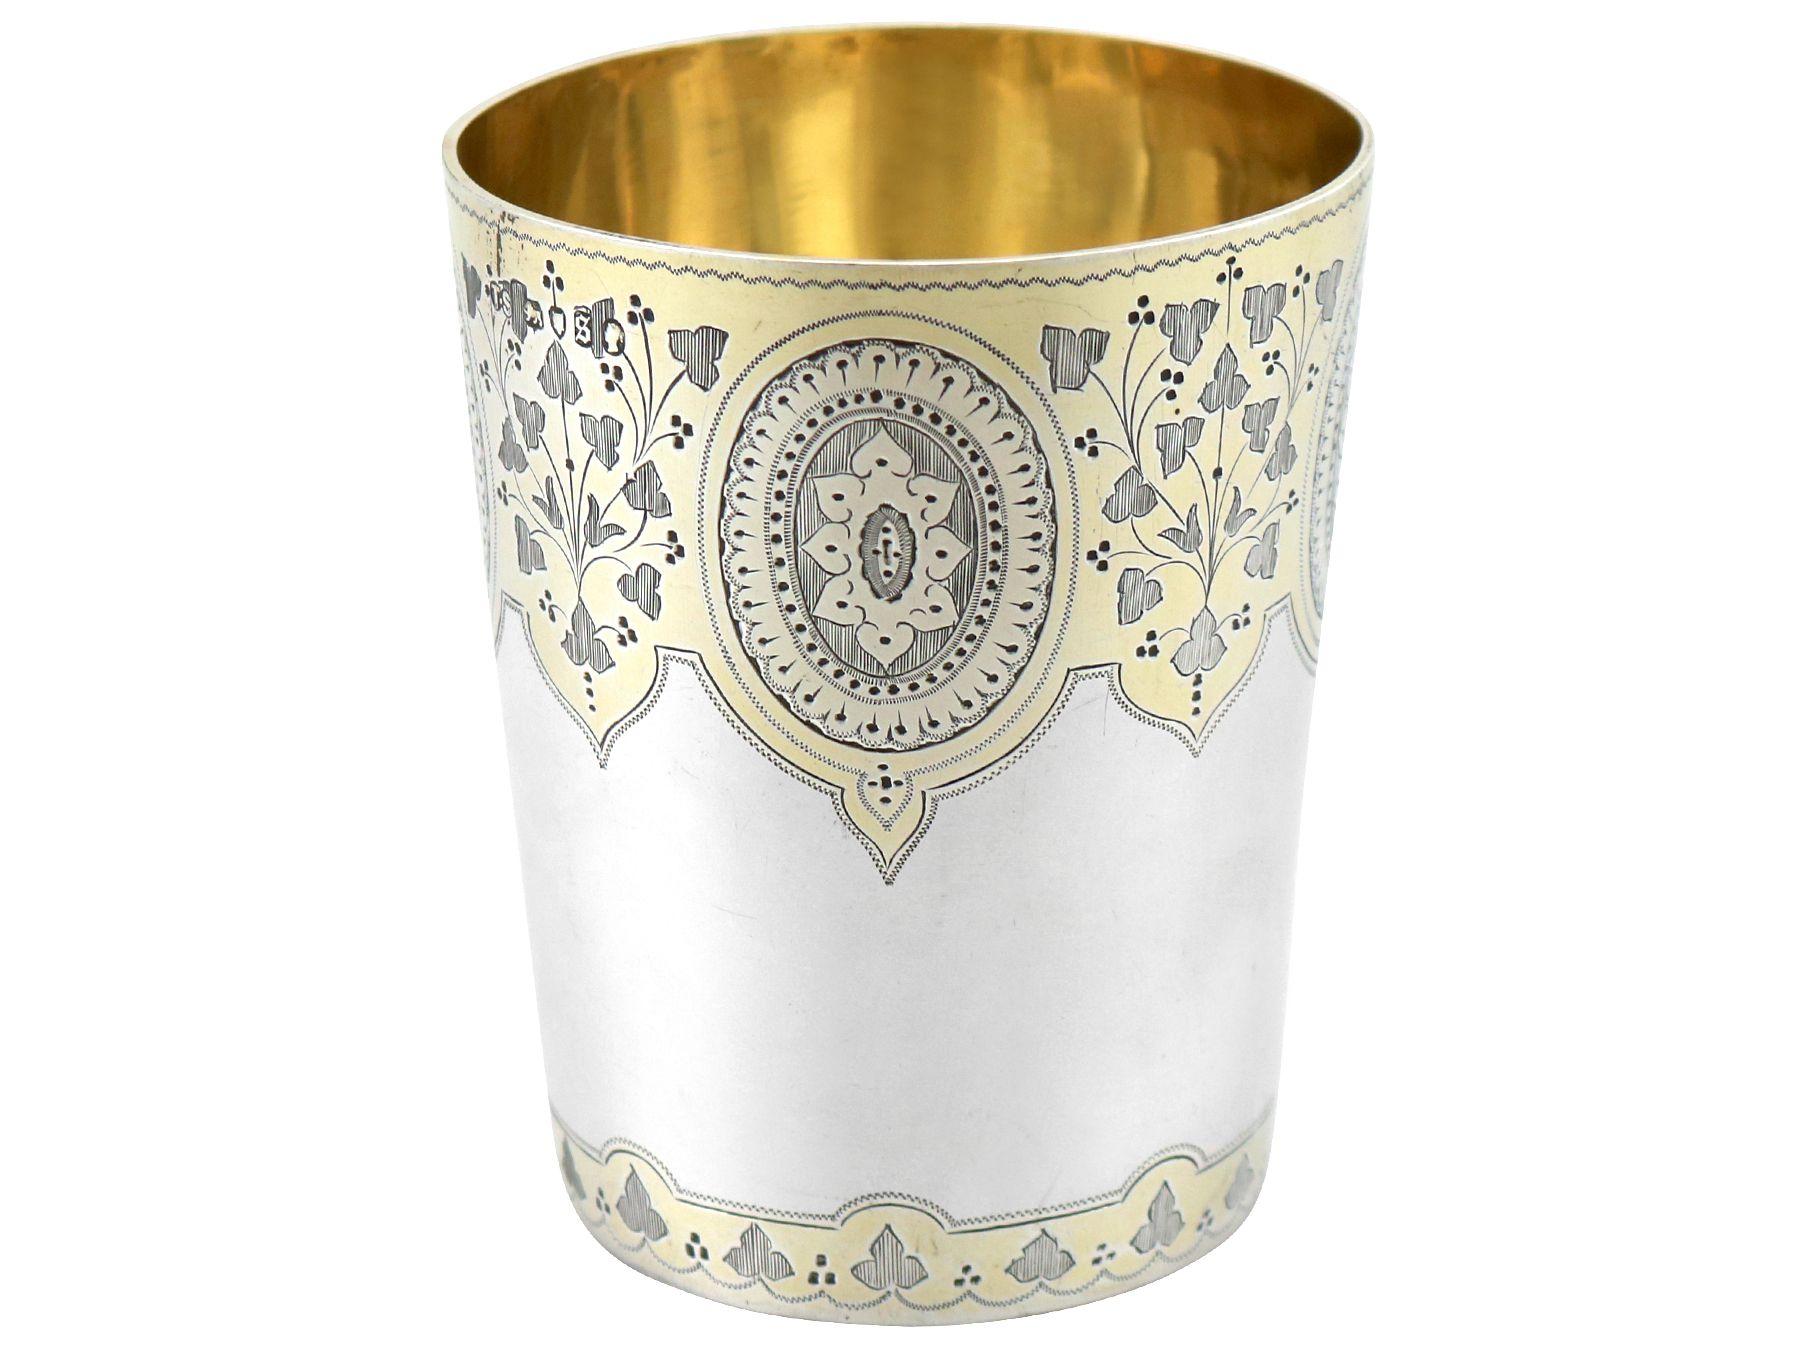 An exceptional, fine and impressive antique Victorian English sterling silver parcel gilt beaker; an addition to our ornamental silverware collection

This exceptional antique Victorian sterling silver beaker has a cylindrical, tapering